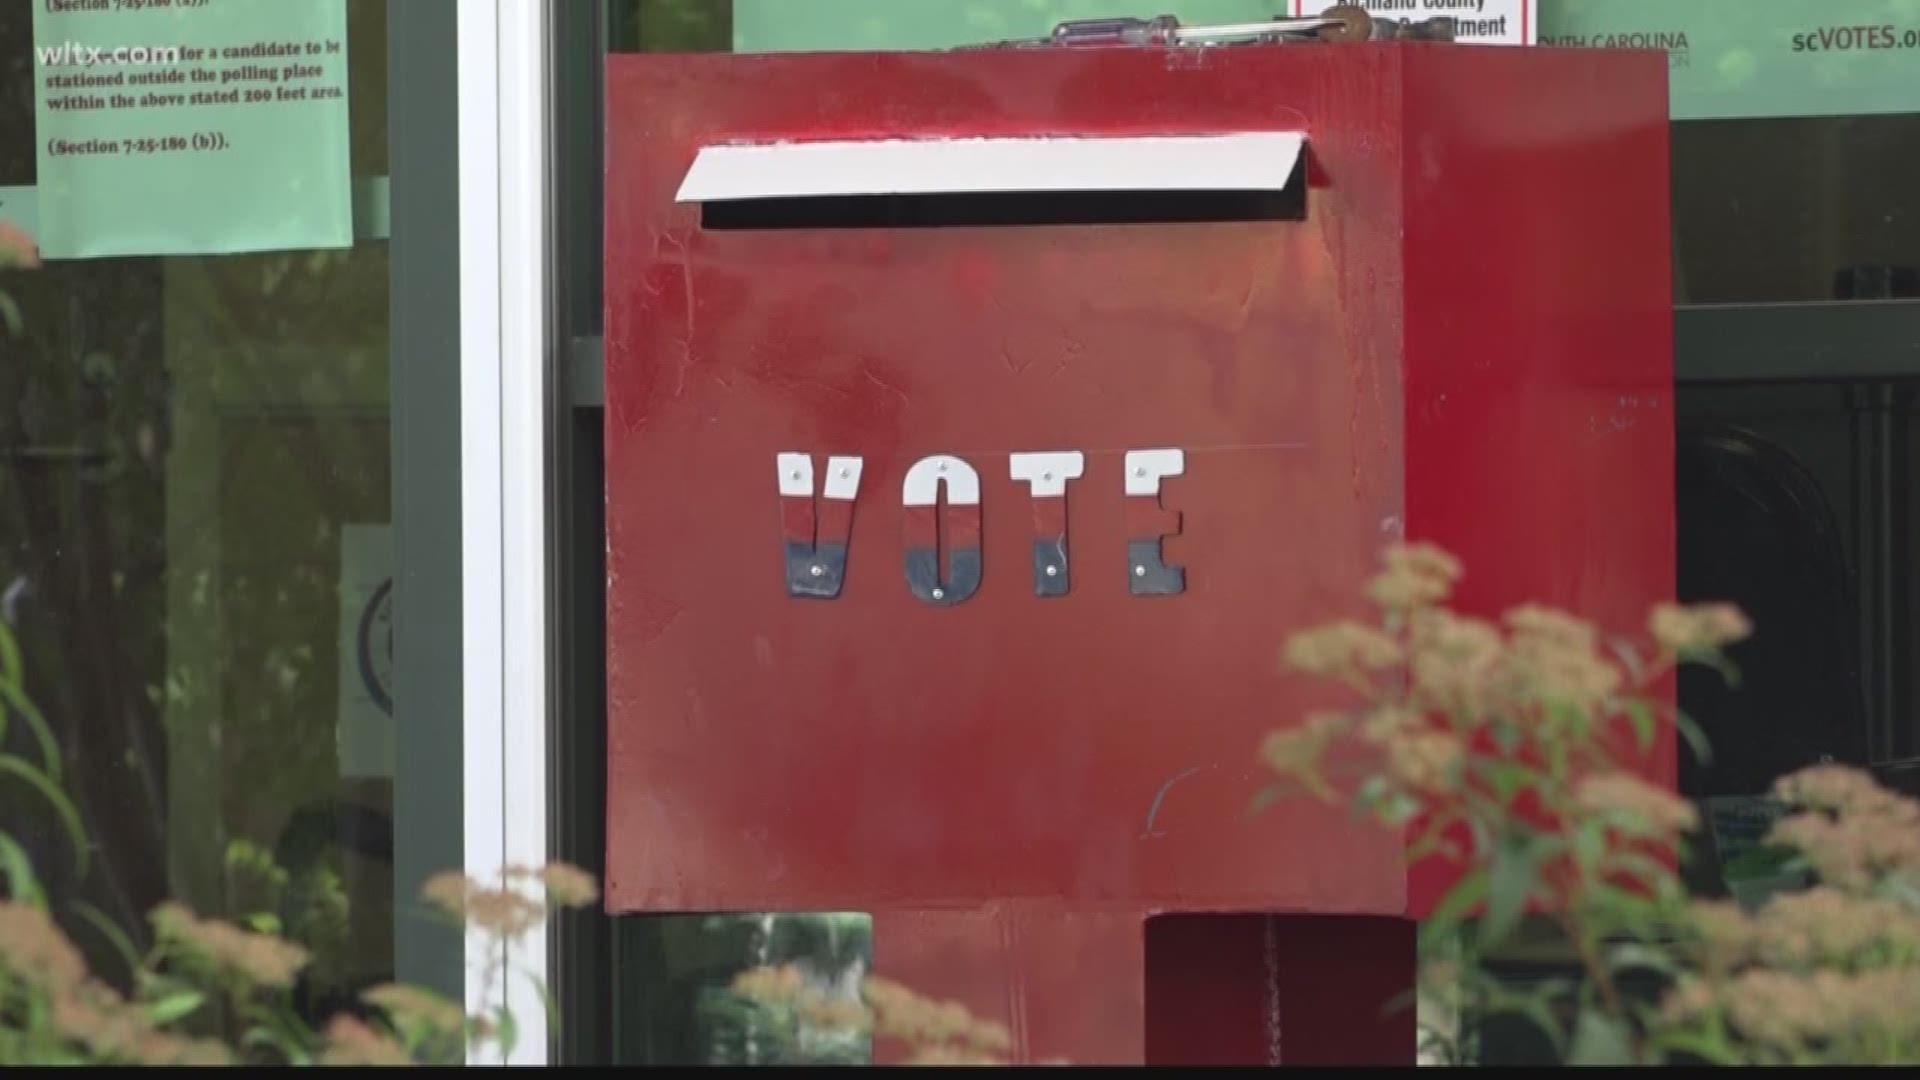 Absentee voters in Richland County now have another way to cast their ballot.A new drop box was just installed, and it lets you drop off your ballot at anytime.